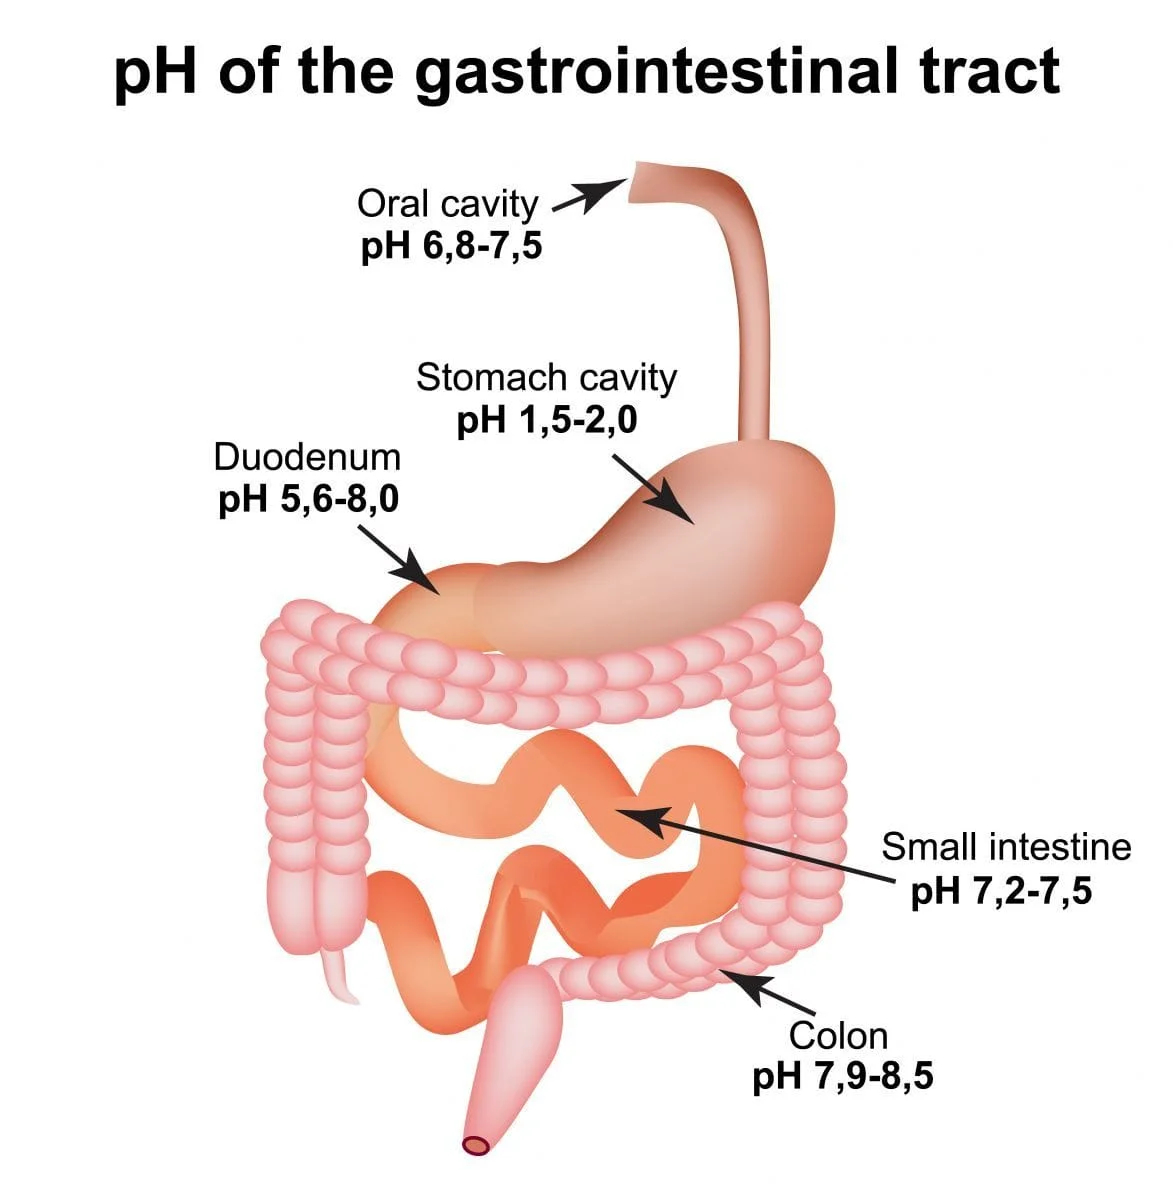 ph of gastrointestinal tract